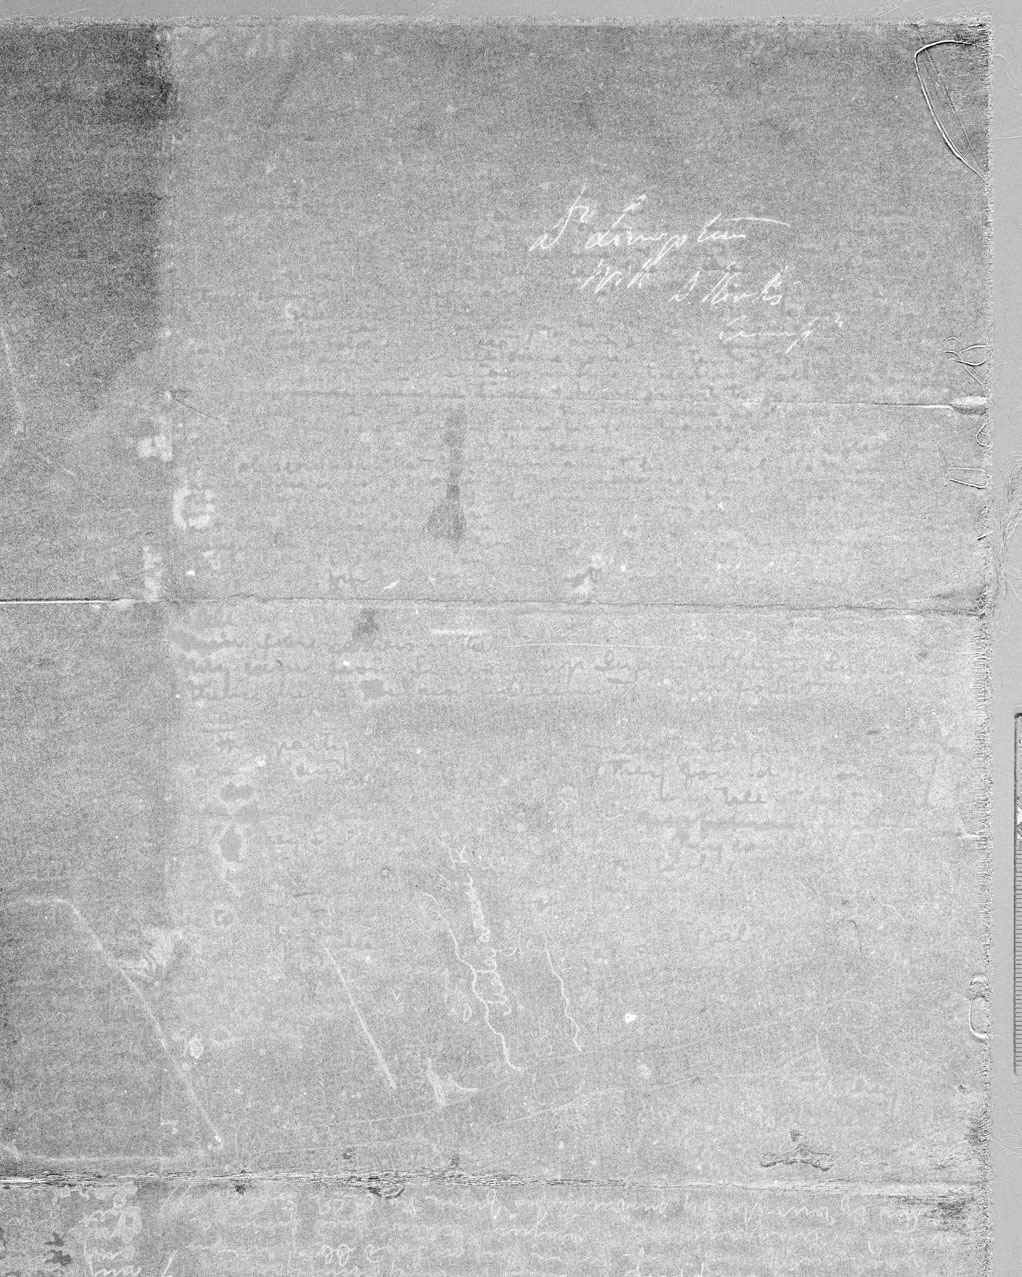 A processed spectral image of a page from the 1870 Field Diary (Livingstone 1870h:XVII IC5), detail. Copyright David Livingstone Centre. Creative Commons Attribution-NonCommercial 3.0 Unported (https://creativecommons.org/licenses/by-nc/3.0/).